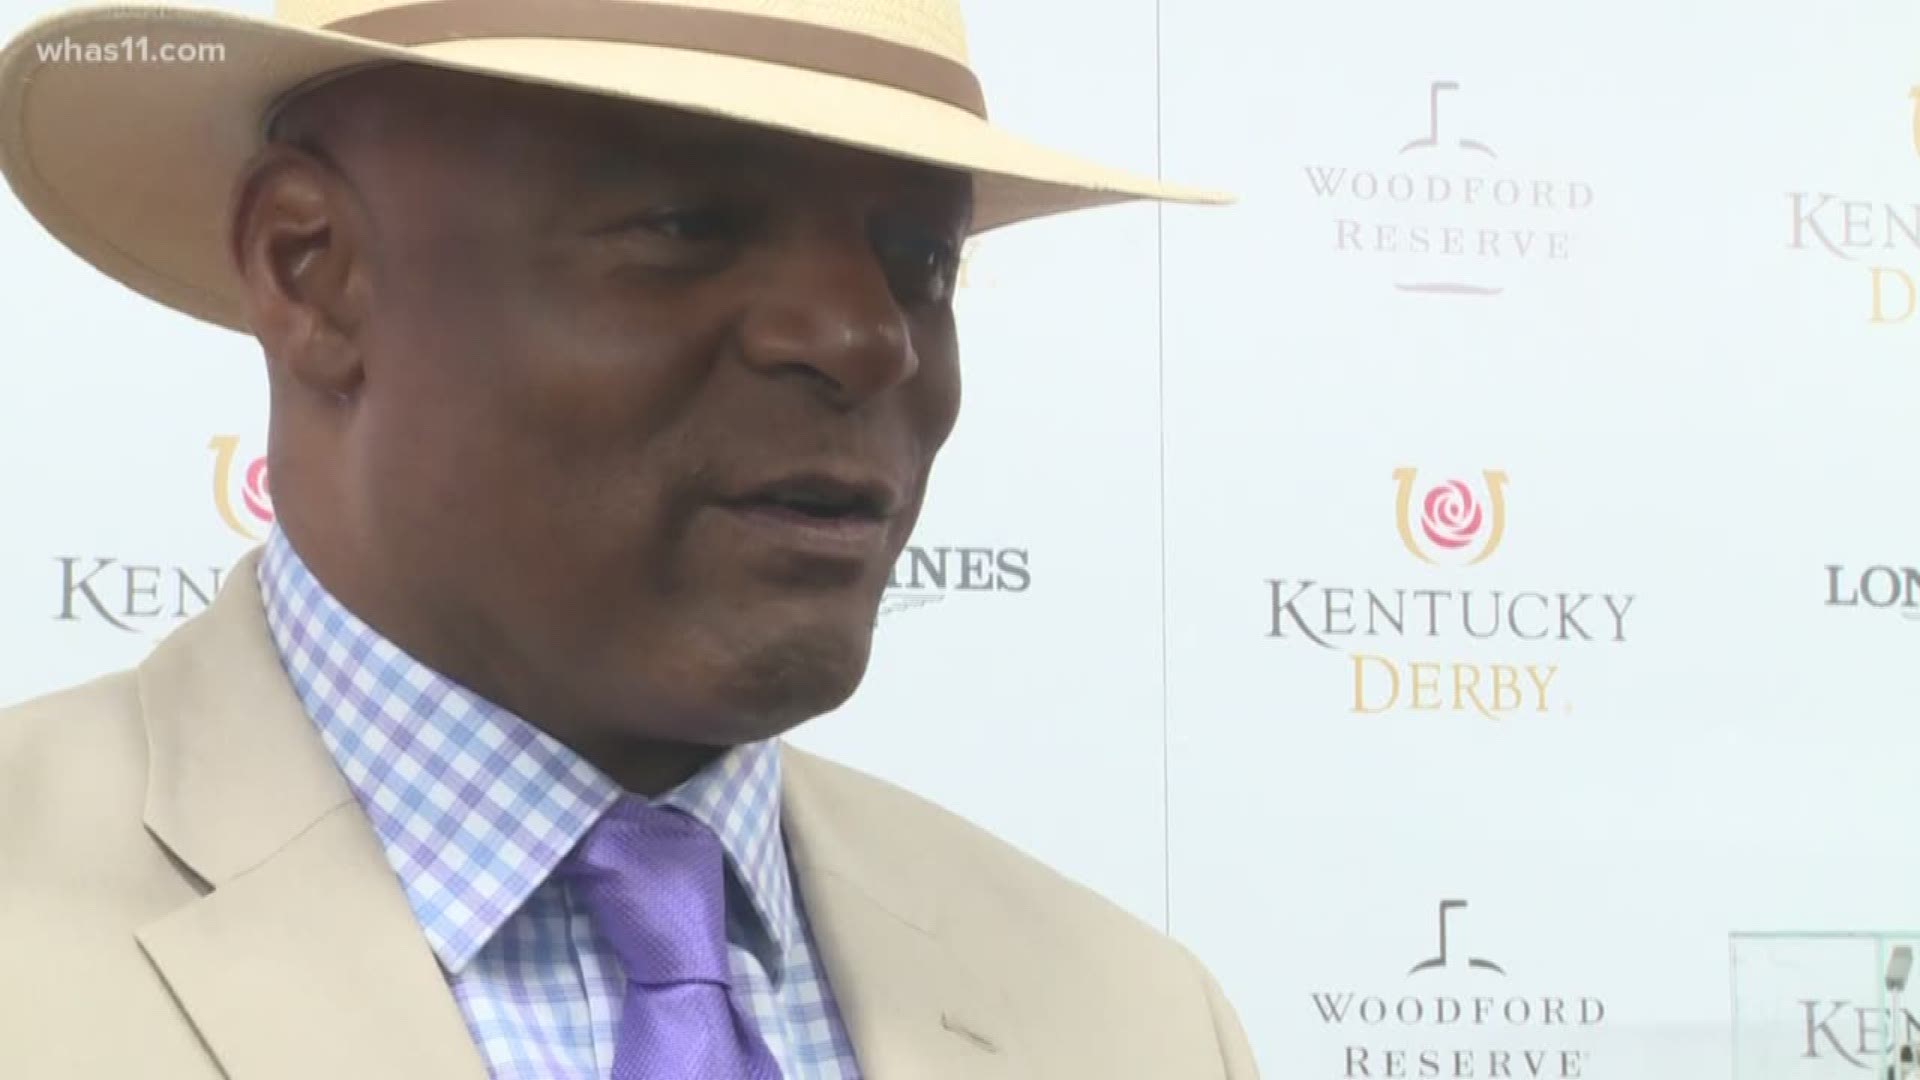 NFL hall of fame quarterback Warren Moon doesn't miss a Kentucky Derby. So this year, we were ready for a chat on the red carpet about the newest Baltimore Raven, and it's safe to say, Moon is already a Lamar Jackson fan.